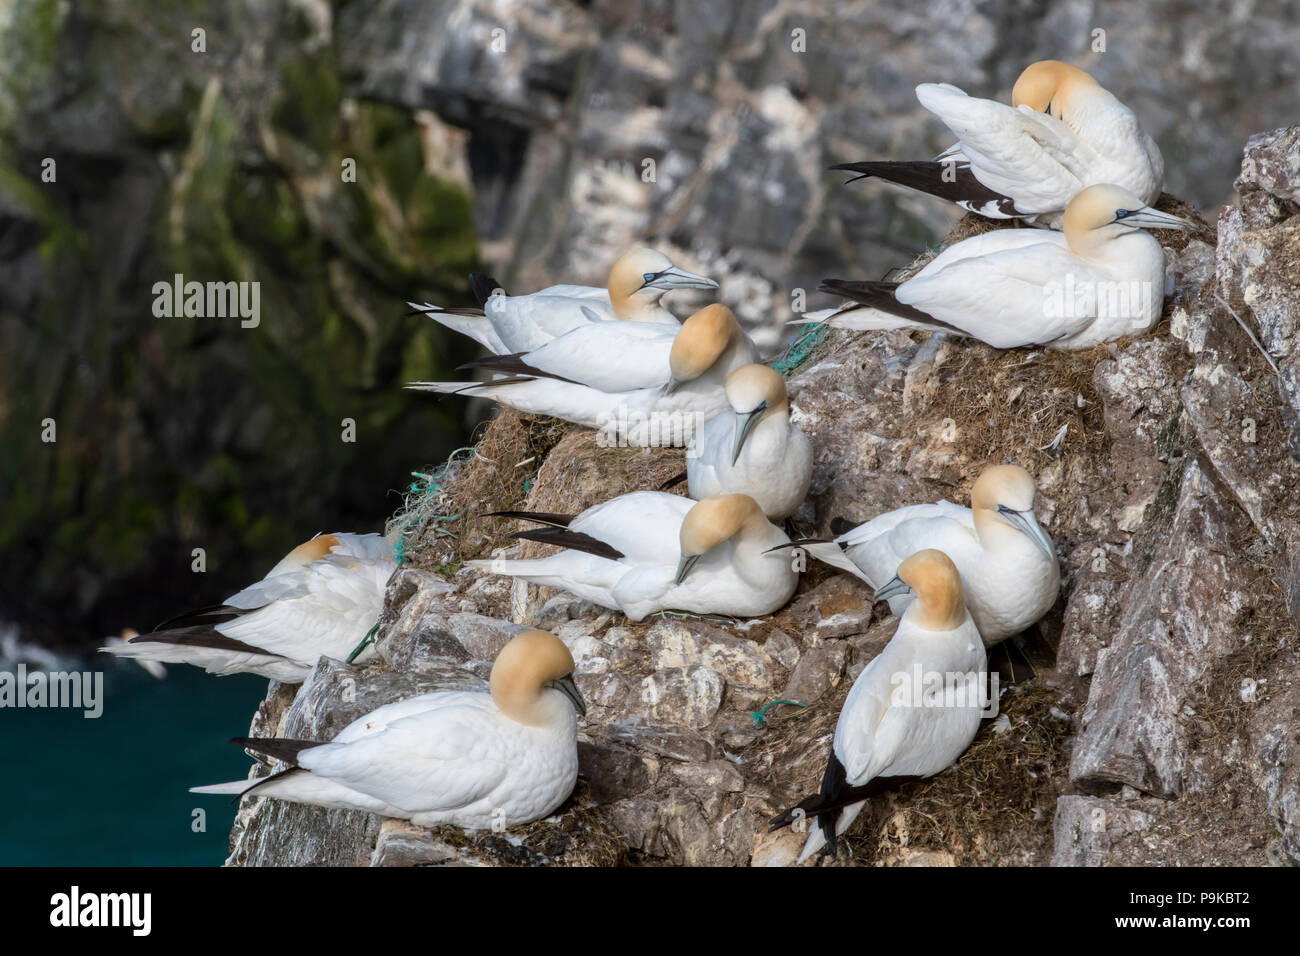 Northern gannets (Morus bassanus) breeding on nests made with parts of nylon fishing nets and ropes in sea cliff at seabird colony in spring Stock Photo